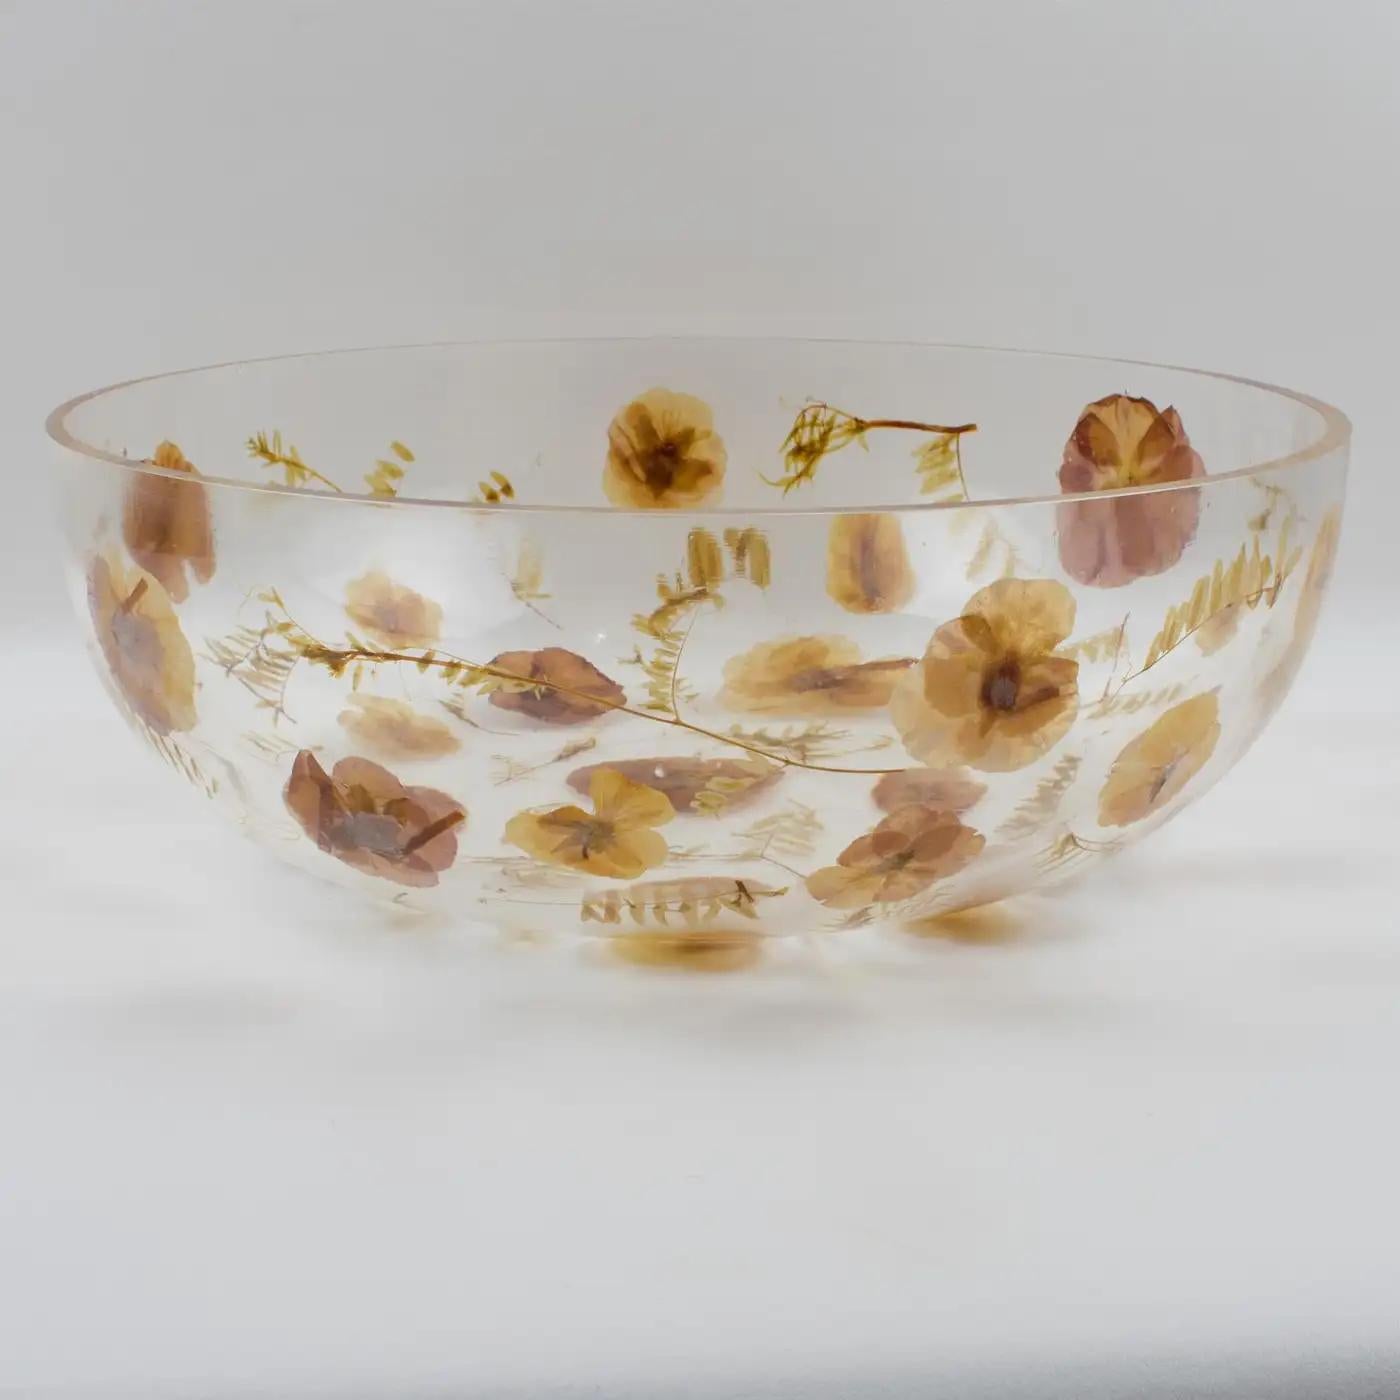 Resinplast, Italy, designed and manufactured this stunning resin decorative bowl or centerpiece circa 1970. The extra thick clear resin or acrylic deep rounded oversized serving bowl shape has assorted real autumn leaves and dried flowers embedded